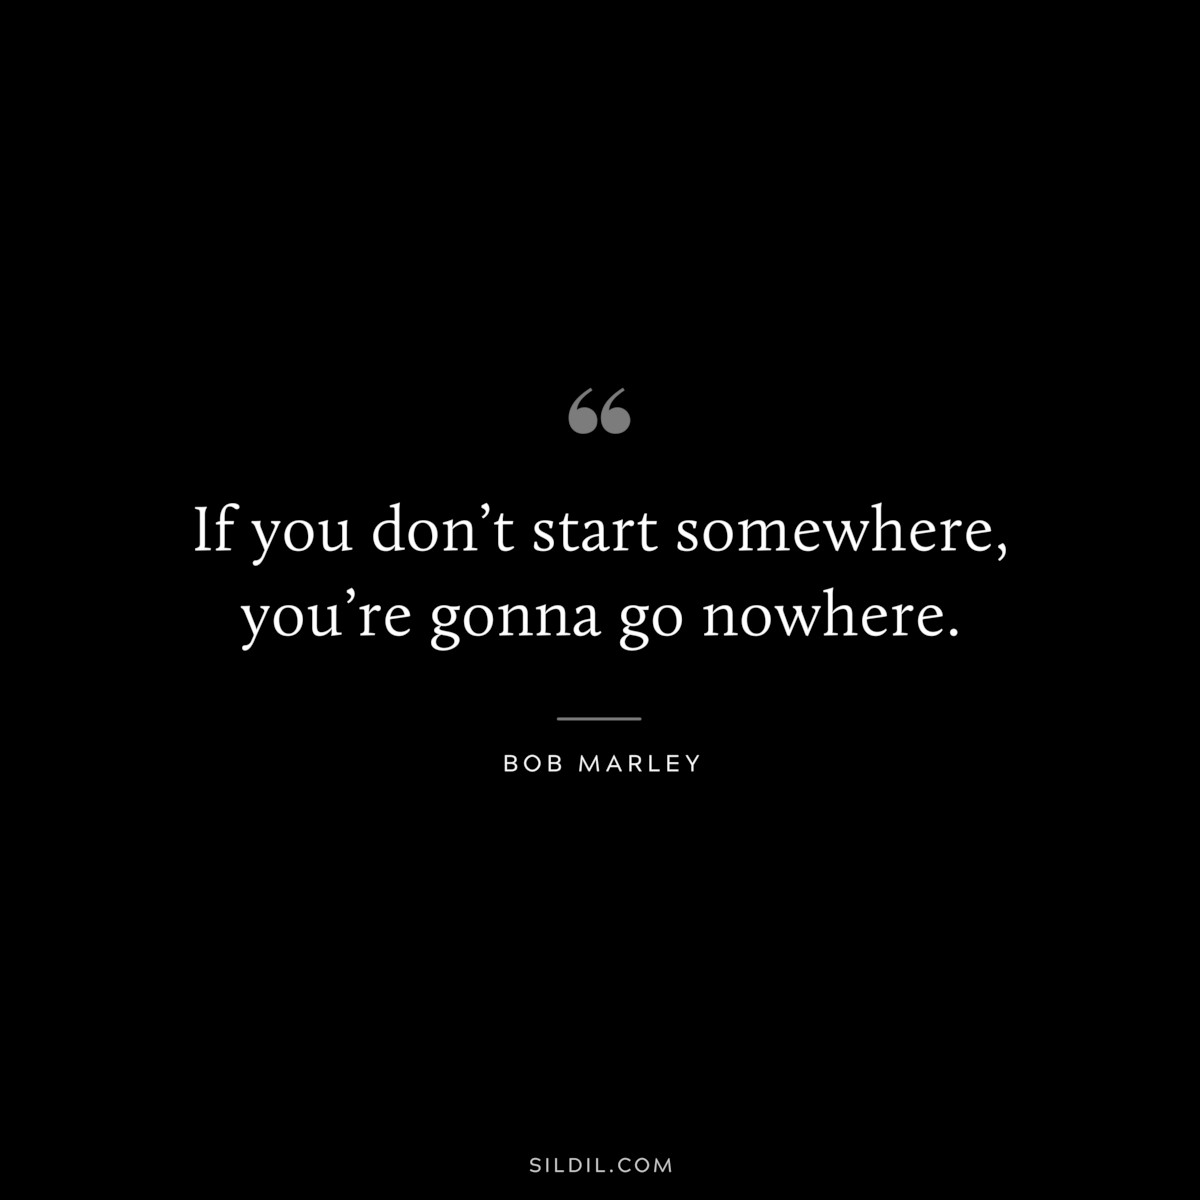 If you don’t start somewhere, you’re gonna go nowhere. ― Bob Marley